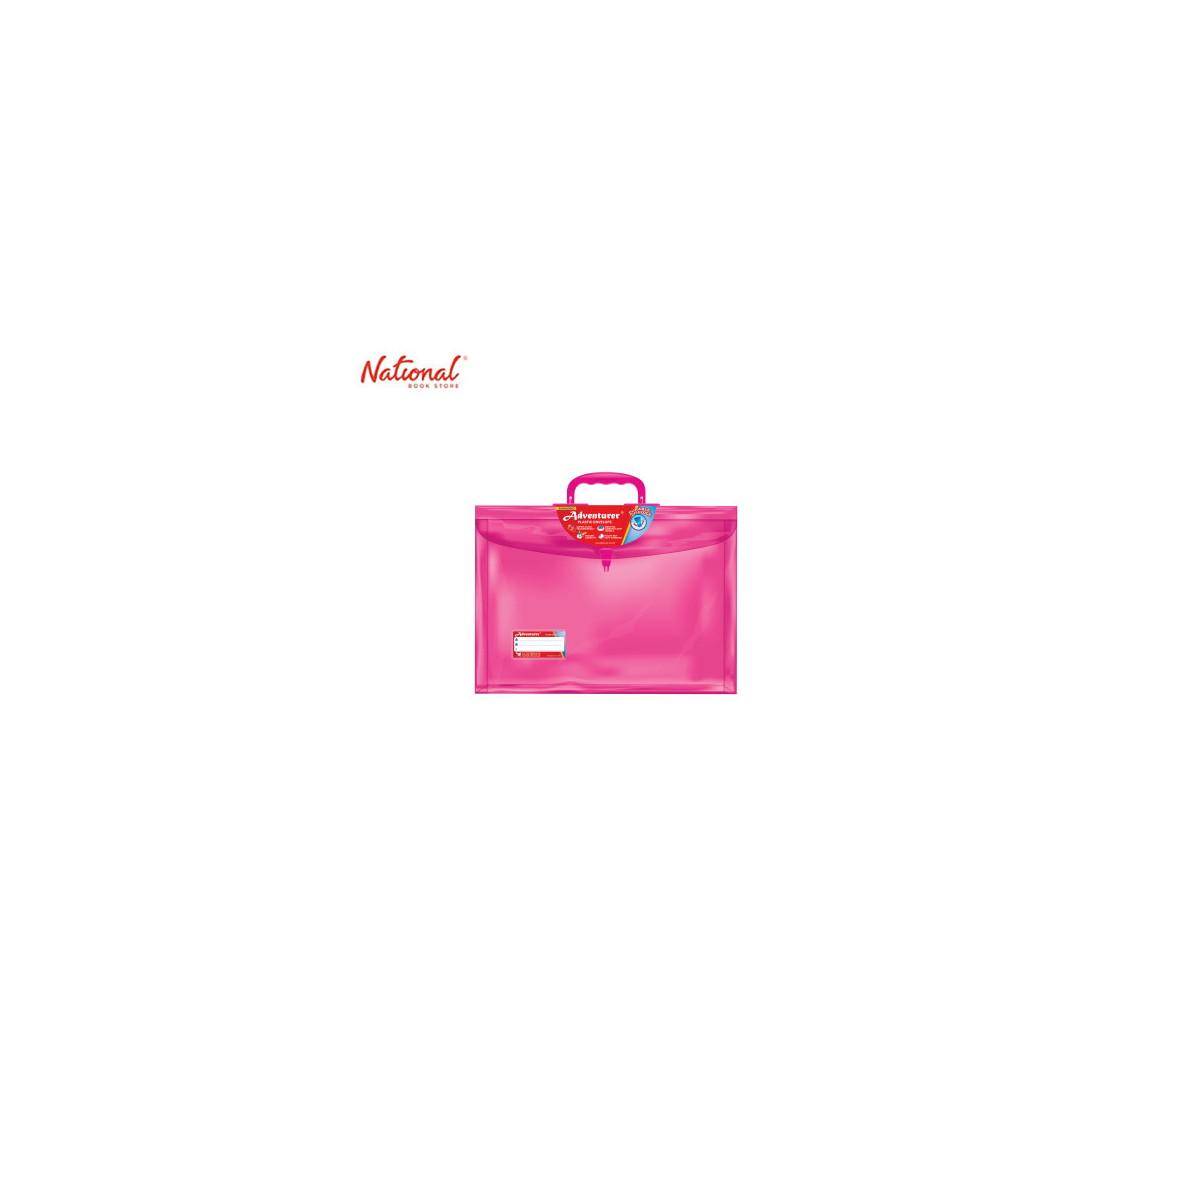 ADVENTURER PLASTIC ENVELOPE EXPANDING WITH HANDLE E19LWH  LONG PUSH LOCK COLORED SMOKE TYPE, PINK